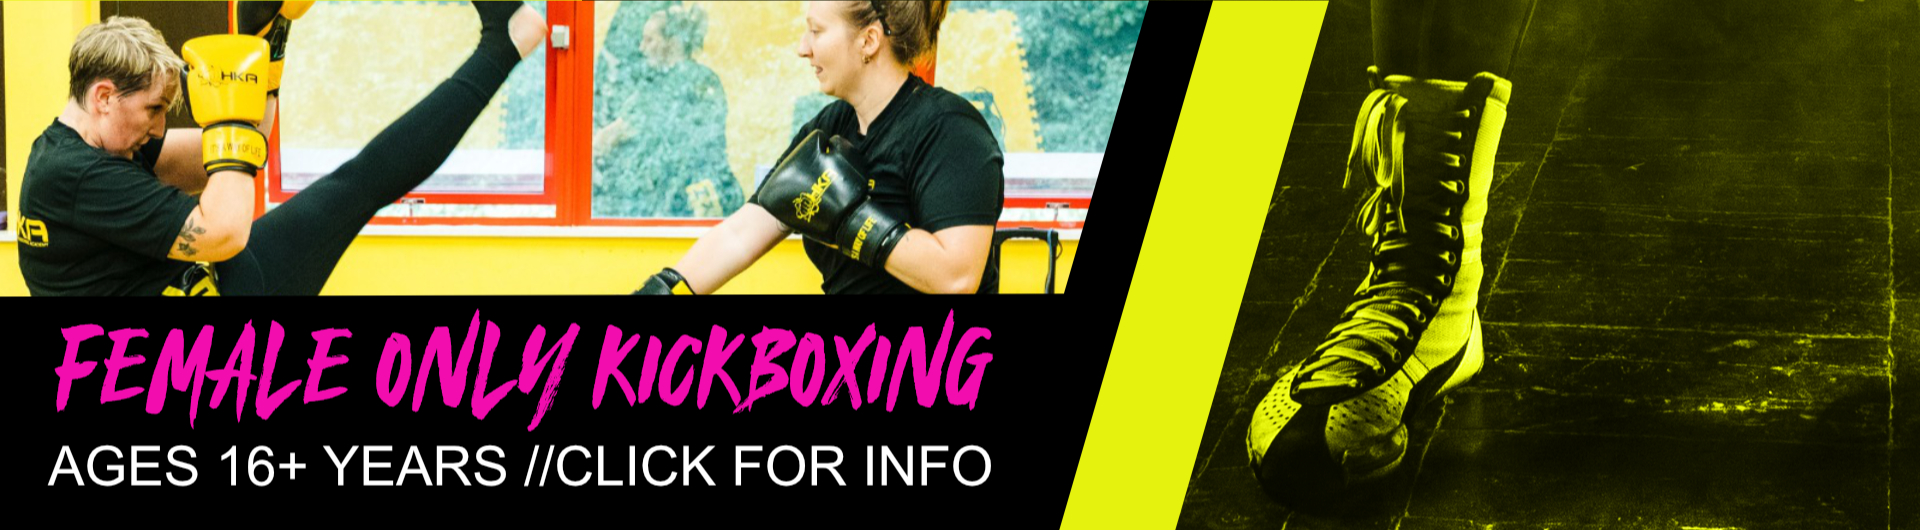 Female Only Kickboxing Class